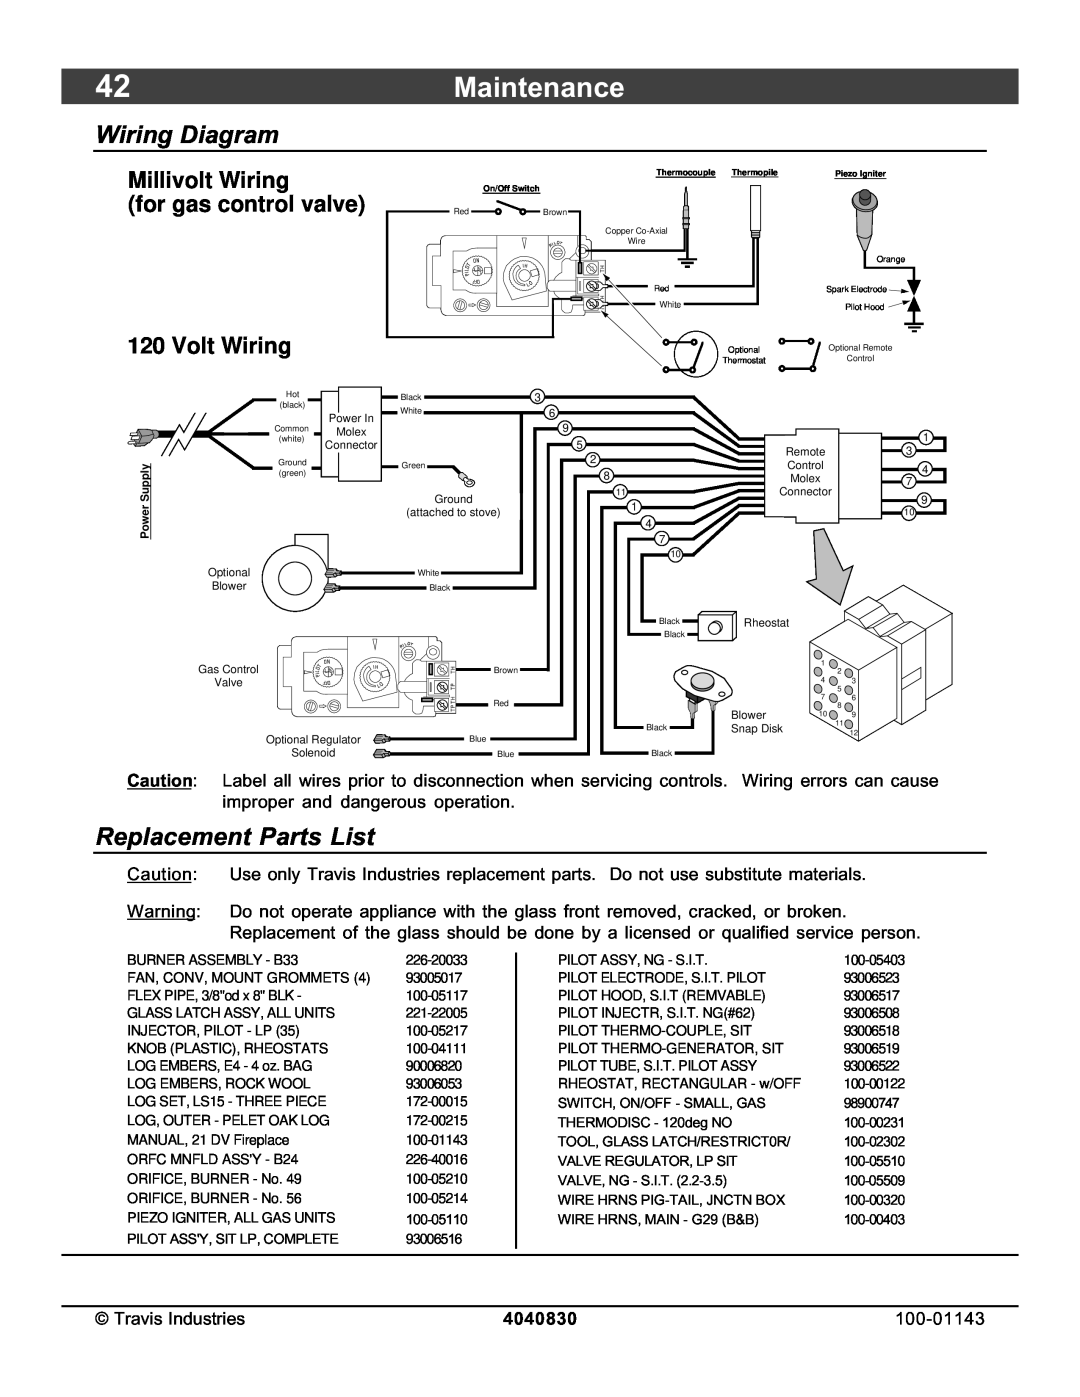 Avalon Stoves 21 DV Fireplace manual 42Maintenance, Wiring Diagram, Replacement Parts List, Millivolt Wiring, 4040830 